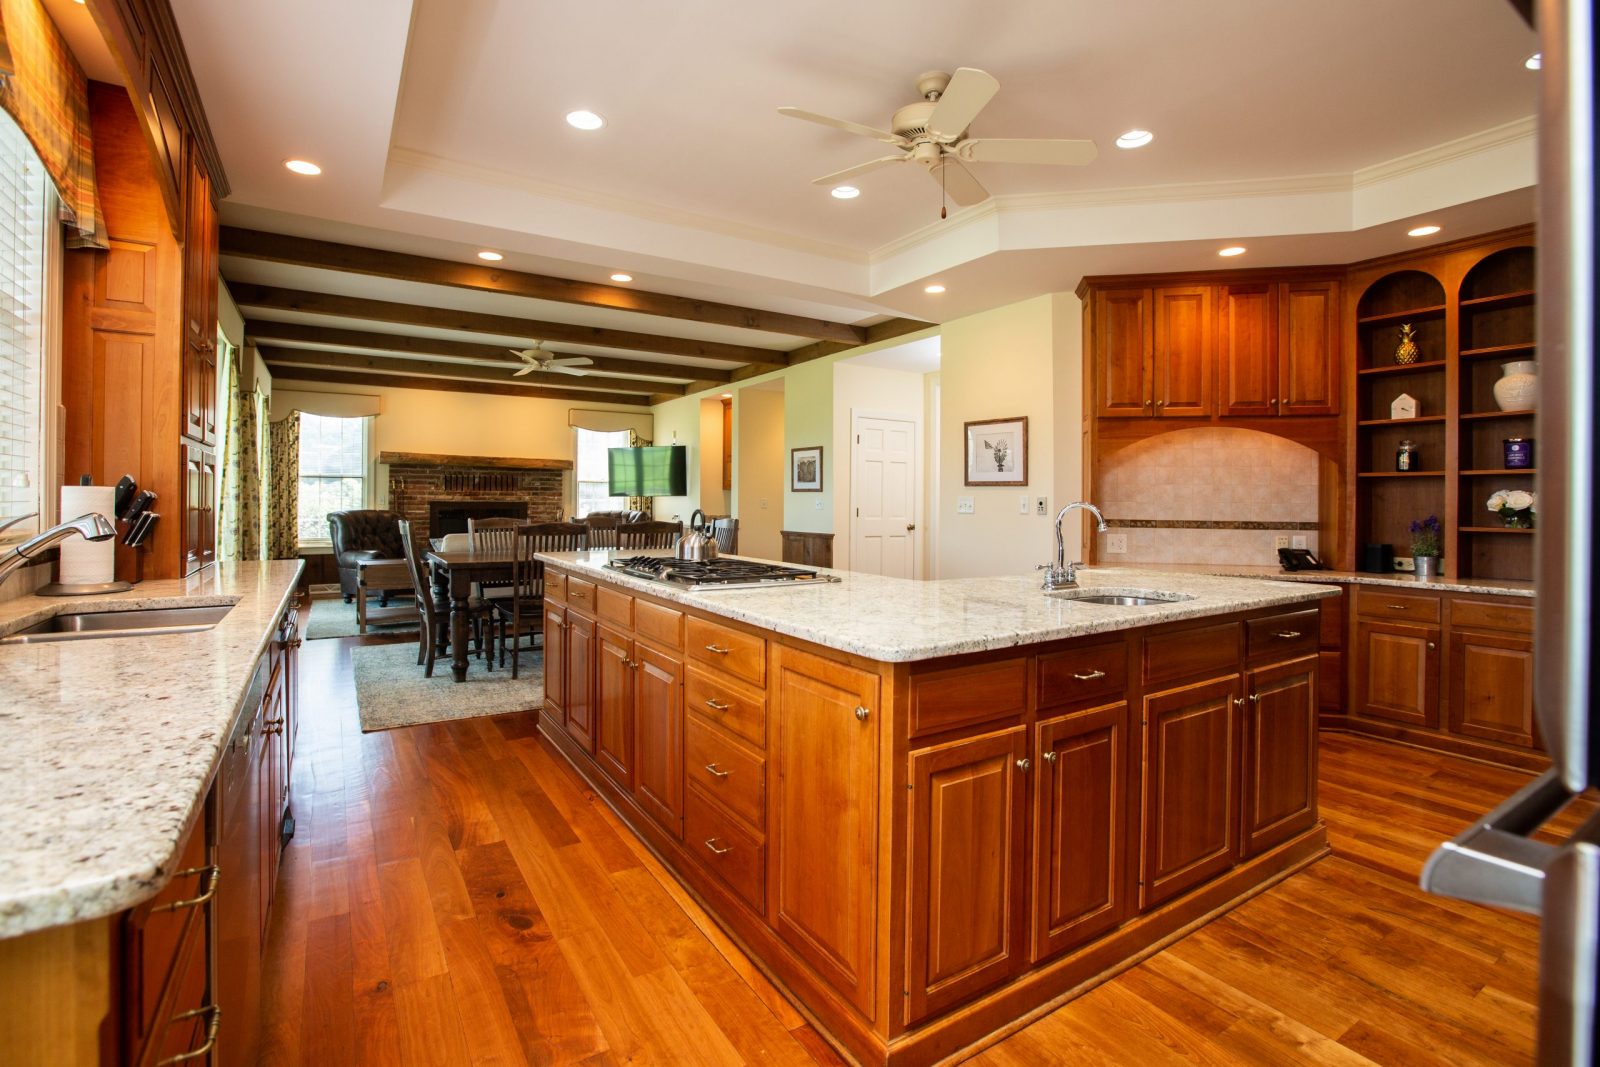 kitchen cabinets and countertops